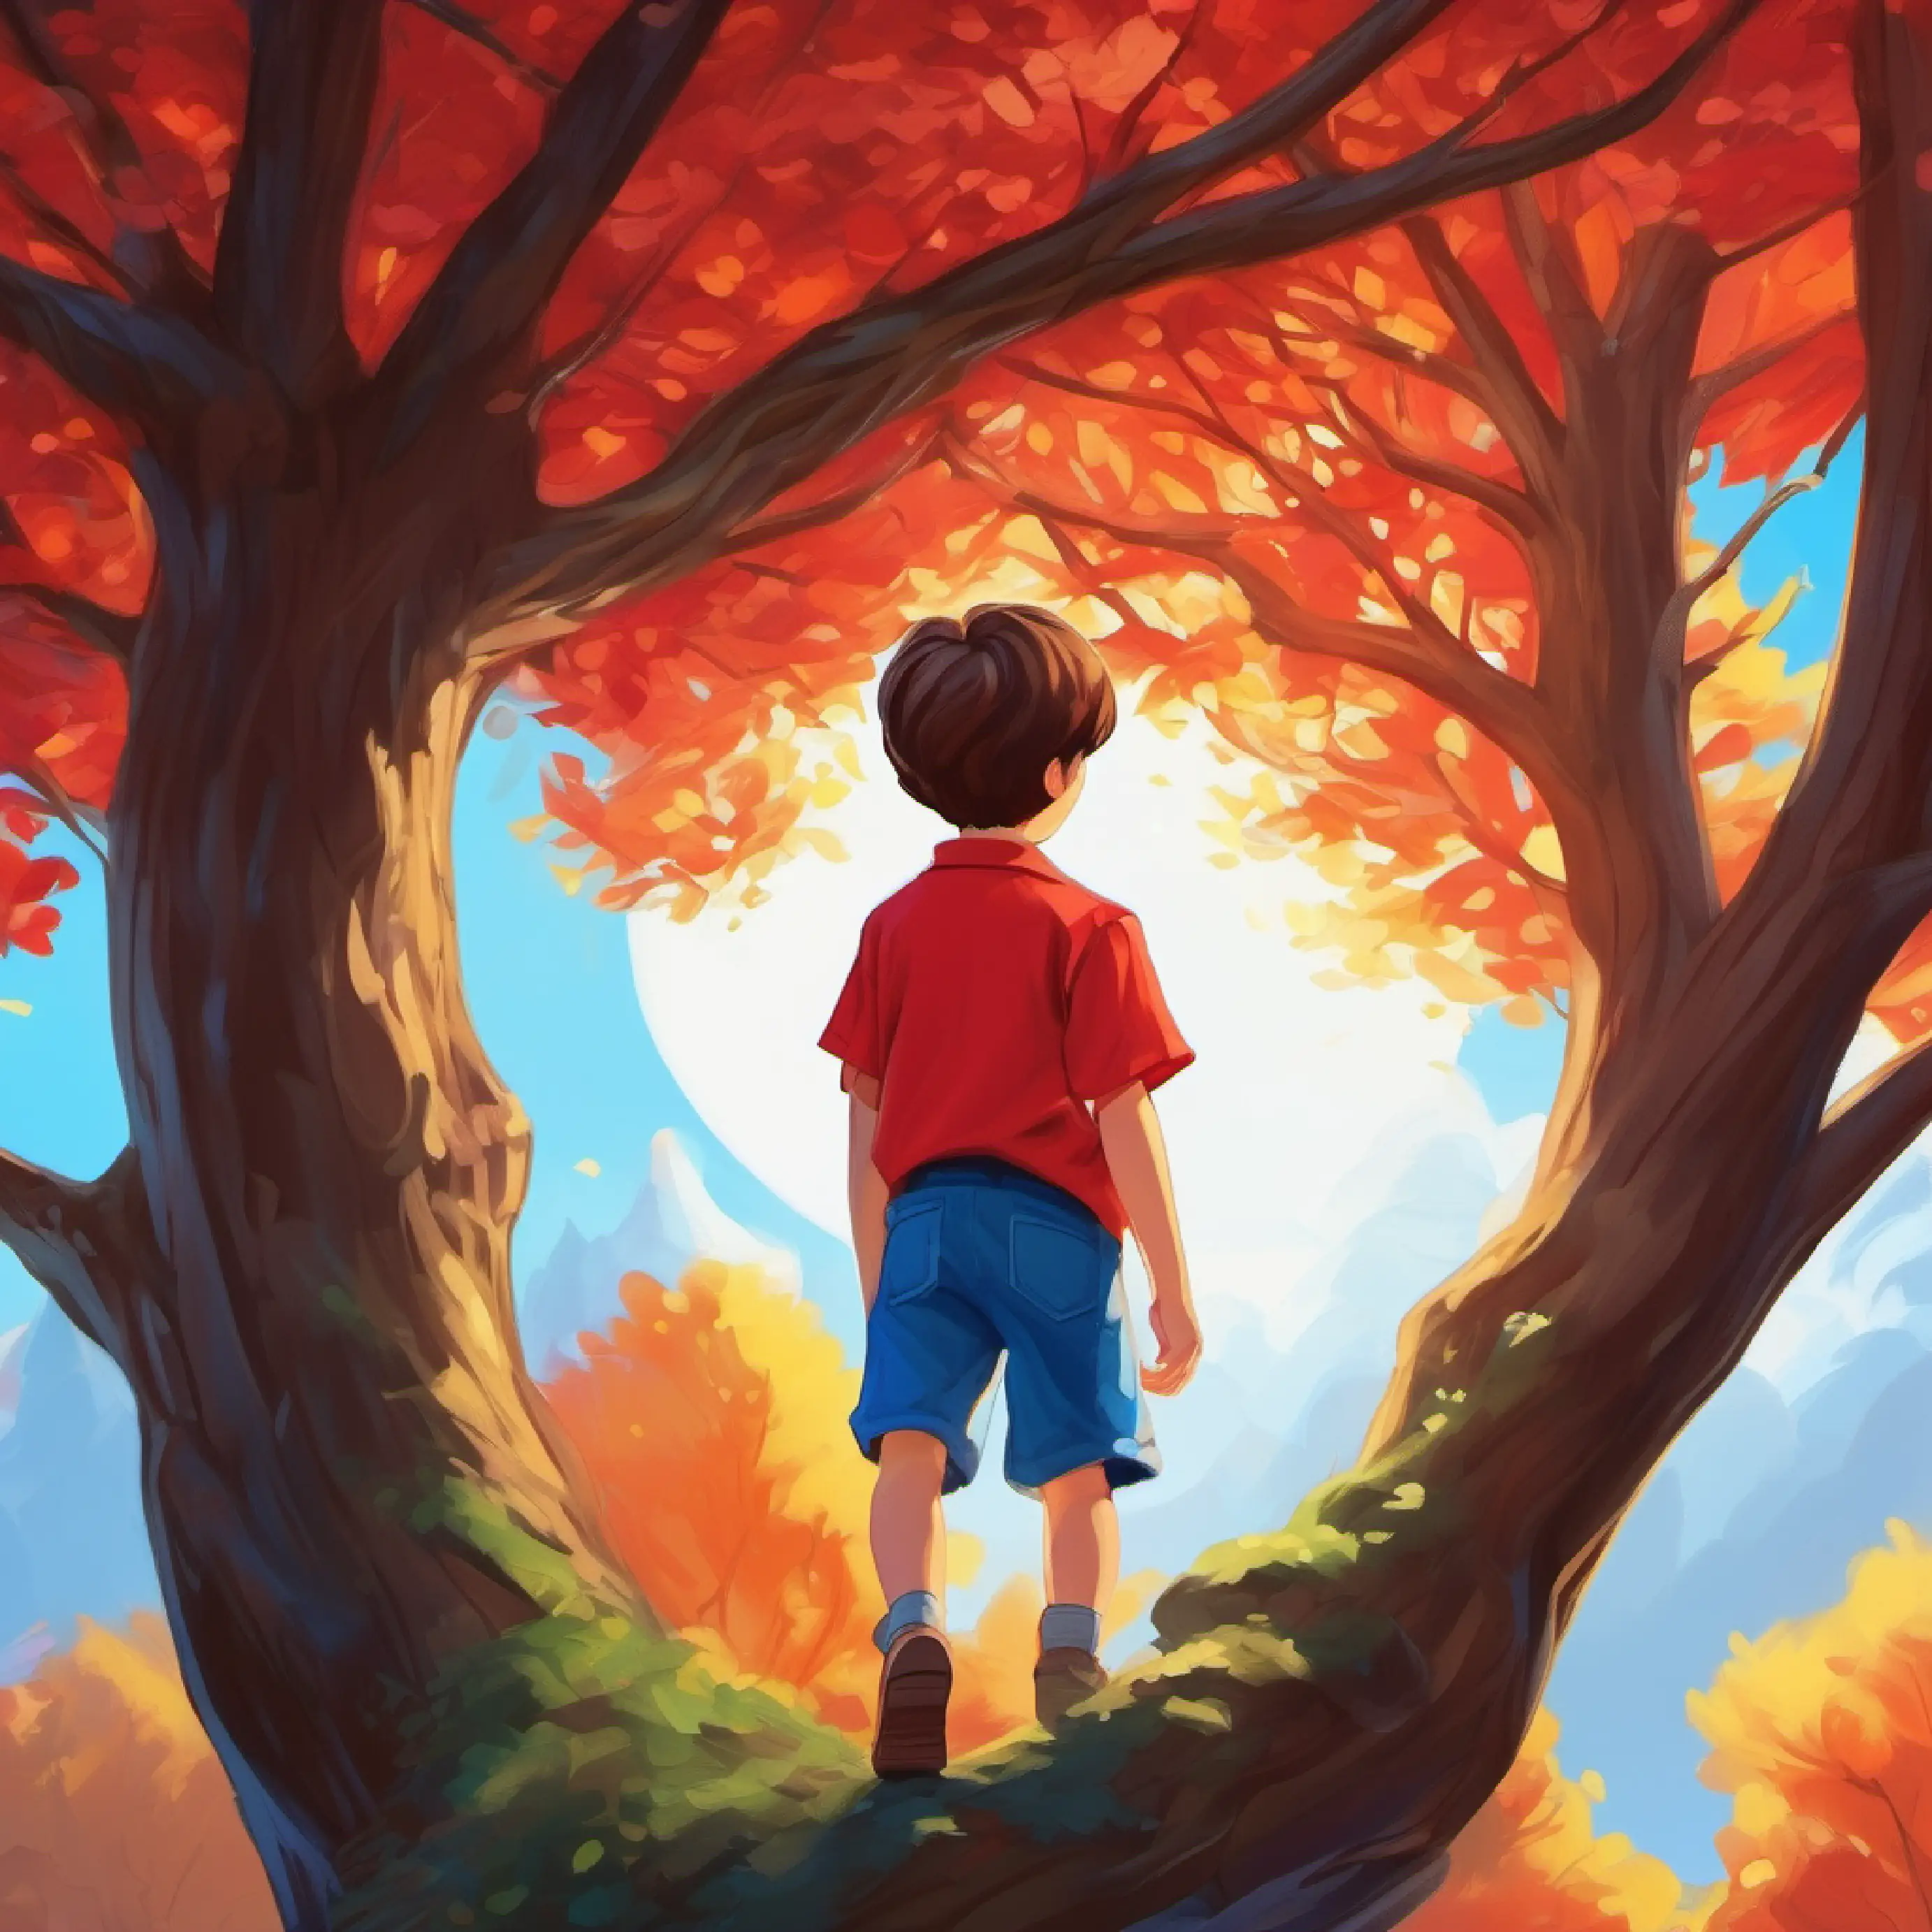 Descending the tree, Young boy, short brown hair, bright blue eyes, wearing a red shirt gains confidence.